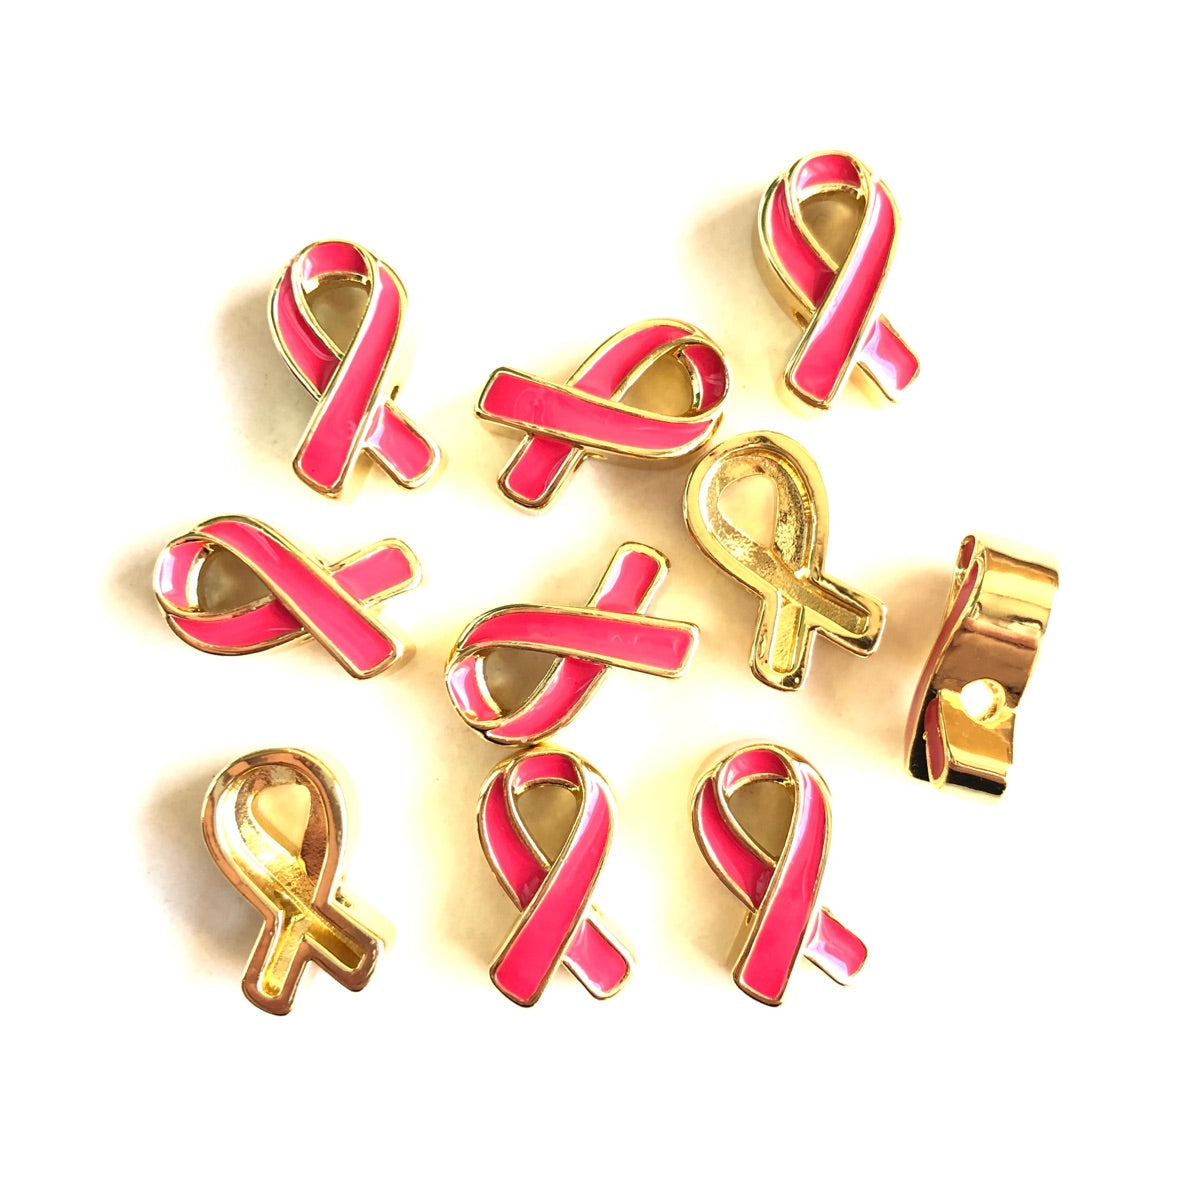 10-20pcs/lot Enamel Pink Ribbon Spacers Beads for Breast Cancer Awareness Gold CZ Paved Spacers Breast Cancer Awareness New Spacers Arrivals Charms Beads Beyond